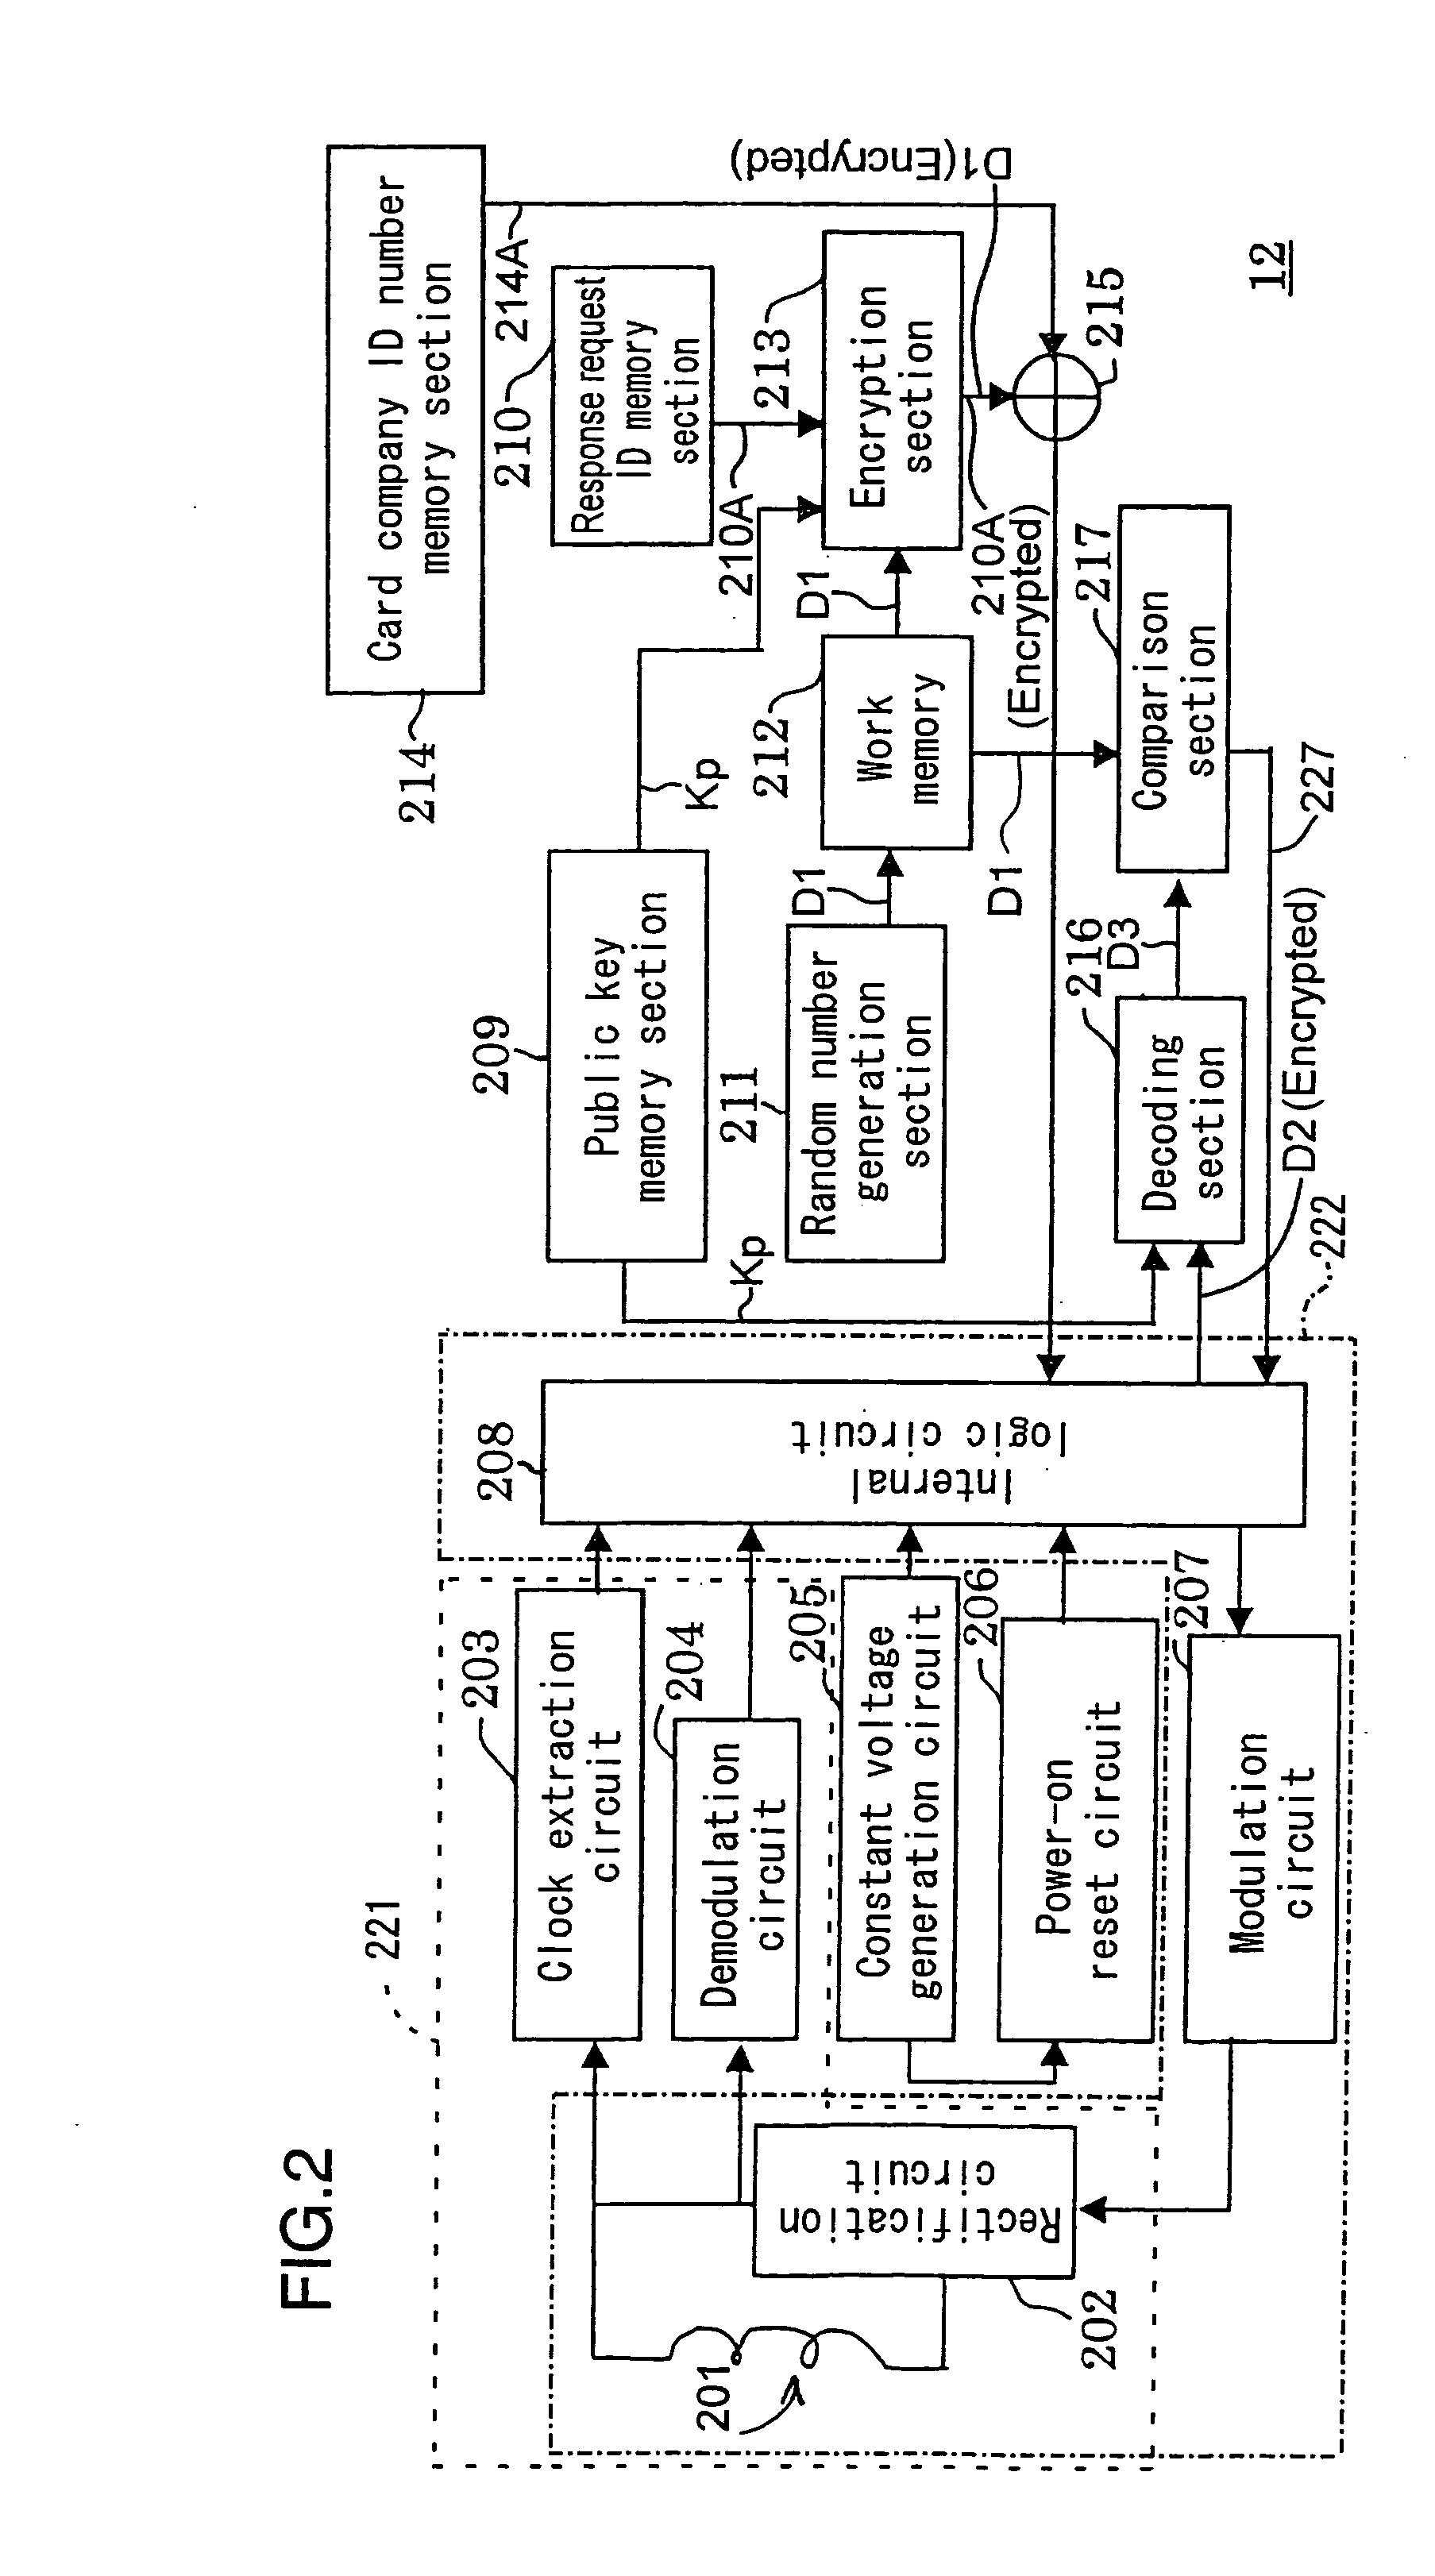 Electronic seal, IC card, authentication system using the same, and mobile device including such electronic seal